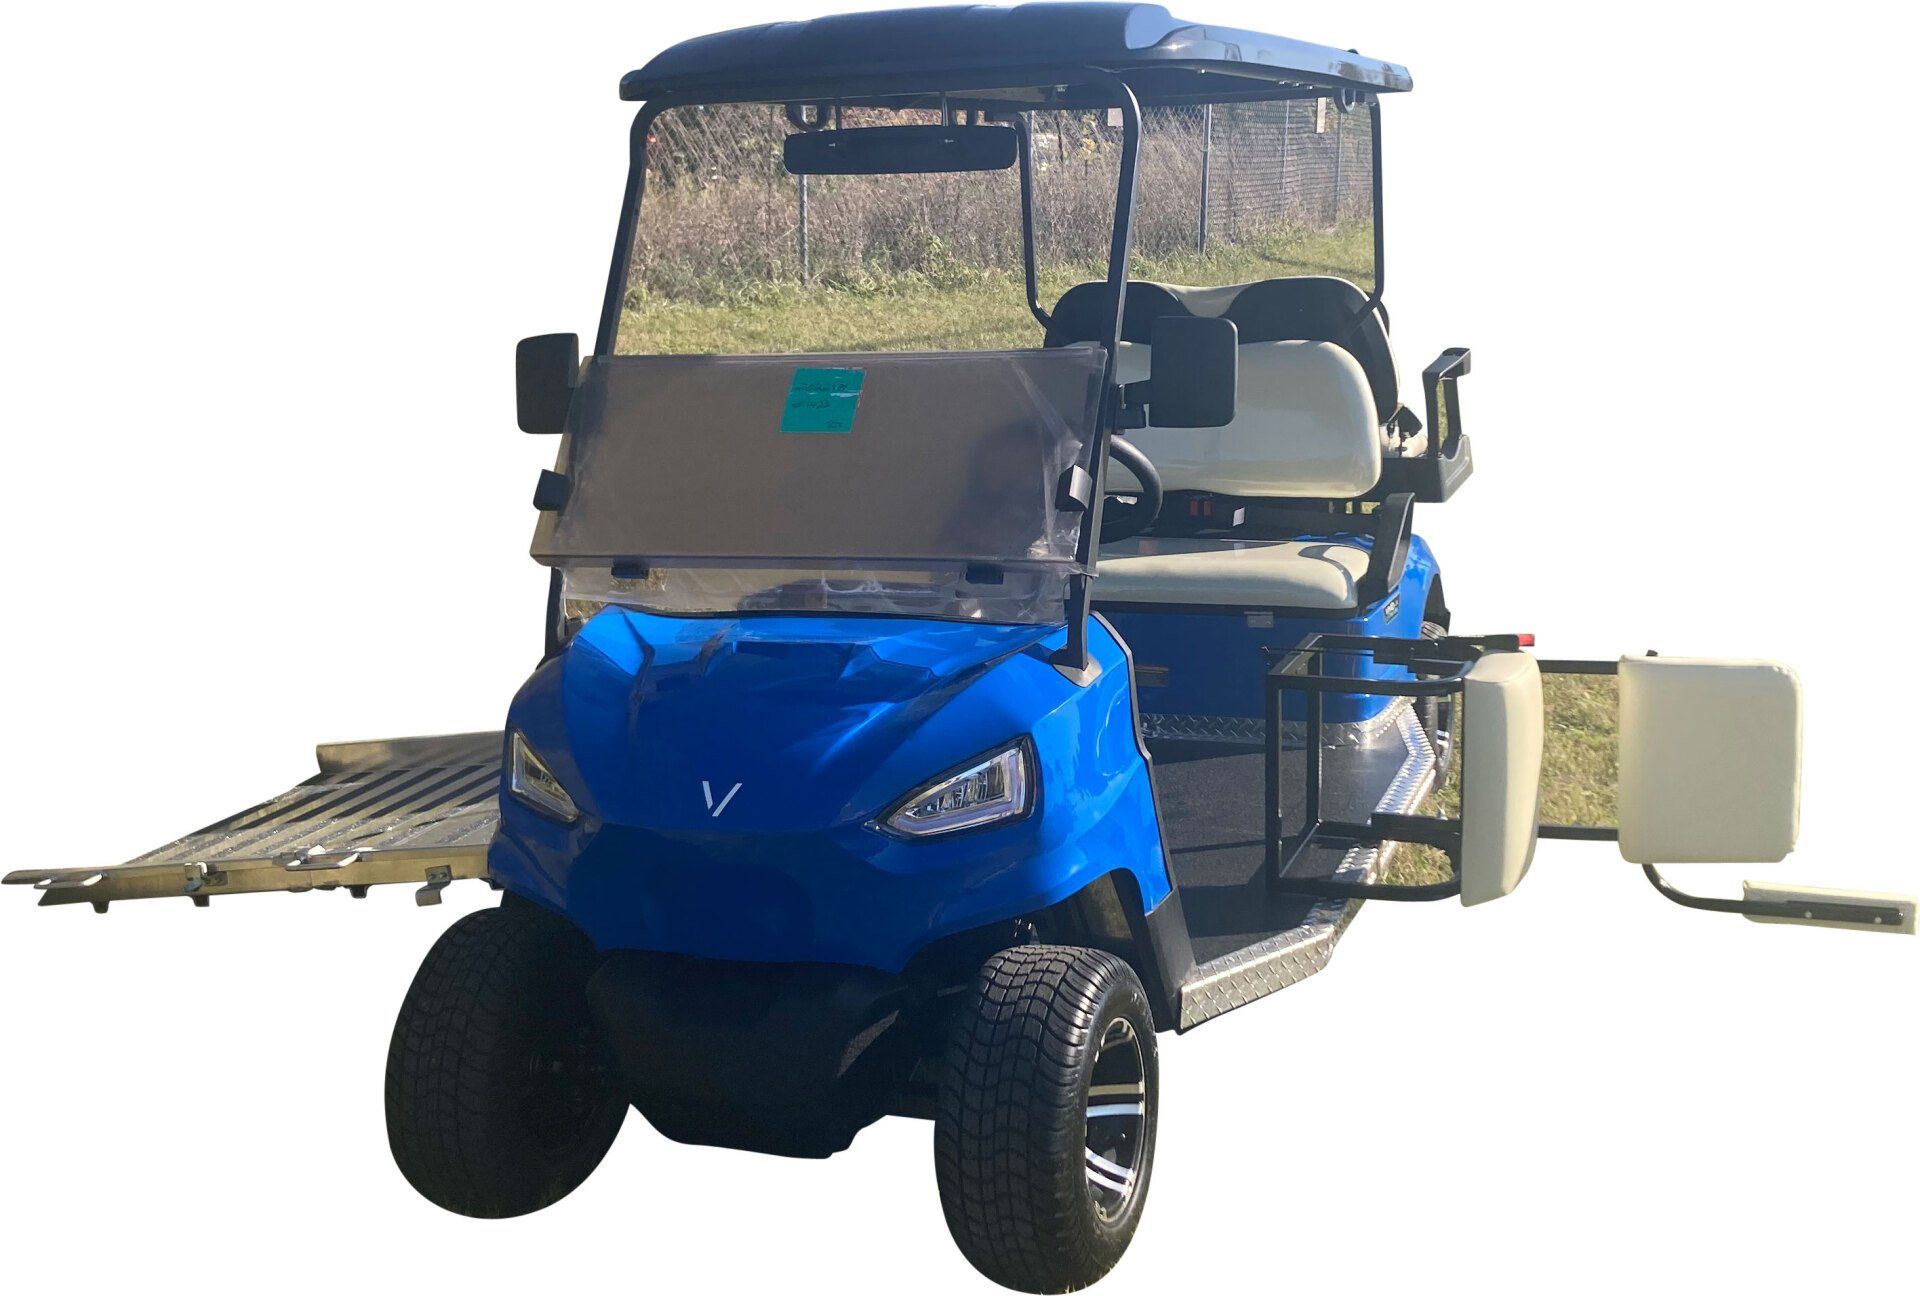 VIVID blue  wheelchair golf cart from PHED Mobility